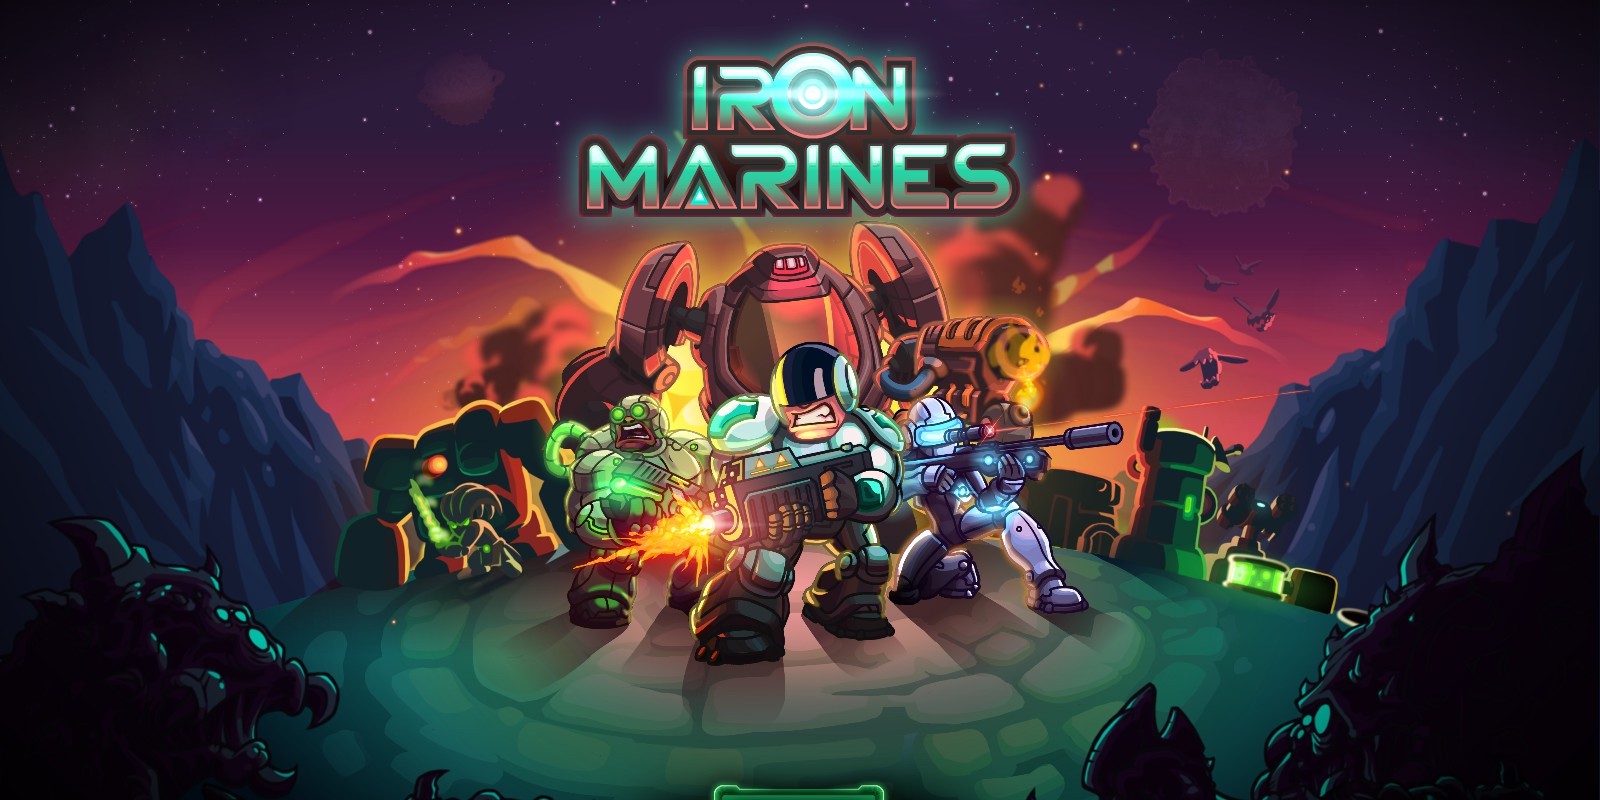 Kingdom Rush creators are back on mobile with sci-fi RTS Iron